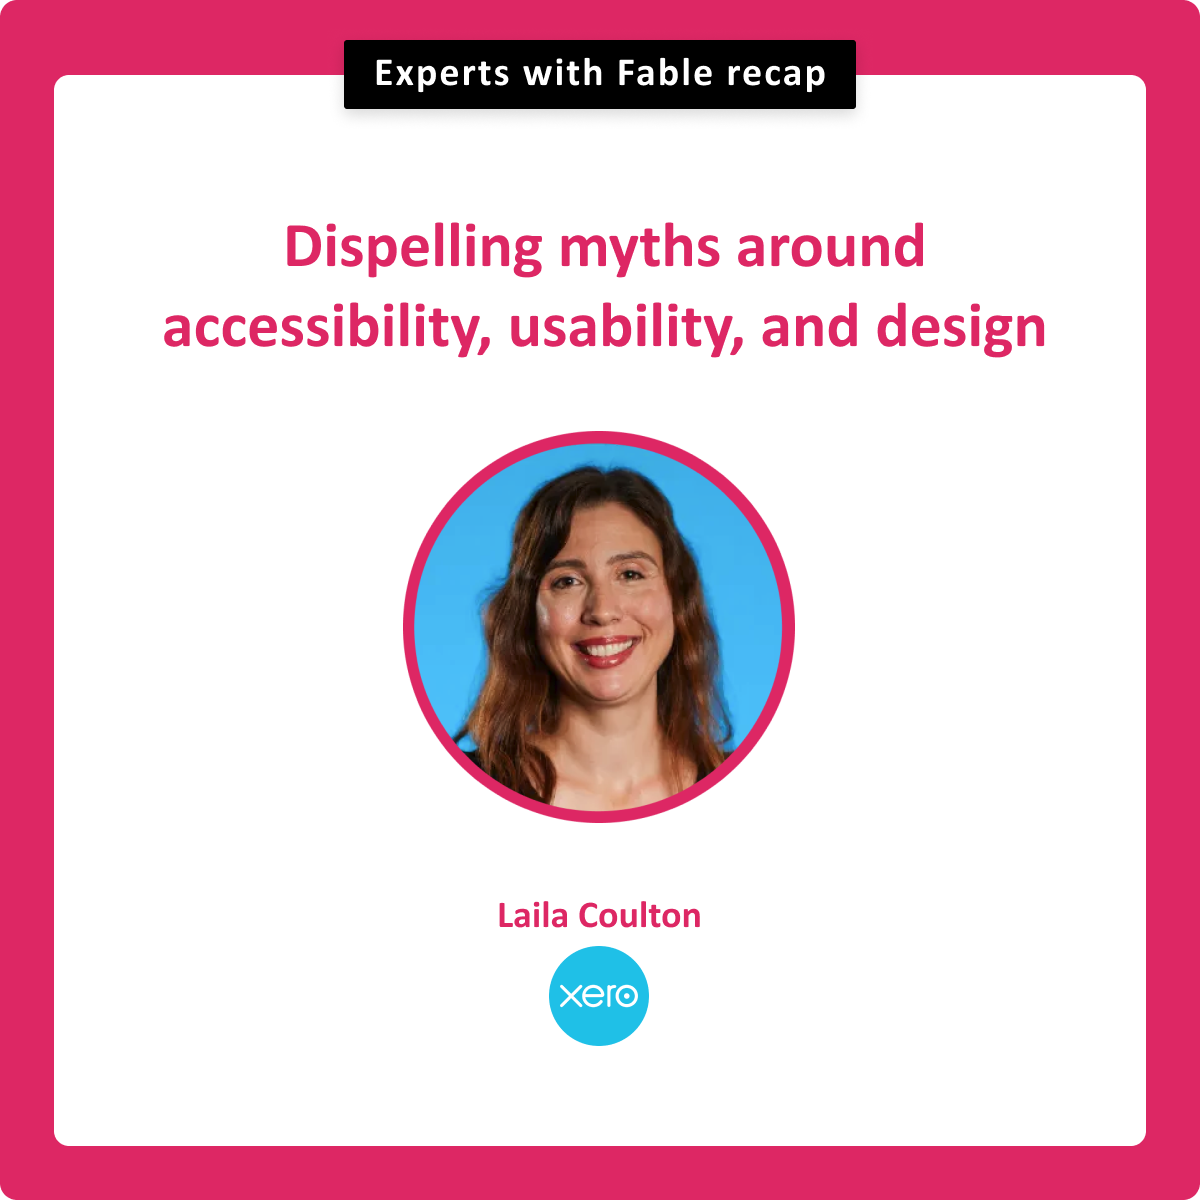 Dispelling myths around accessibility, usability, and design. Laila Coulton, Xero.